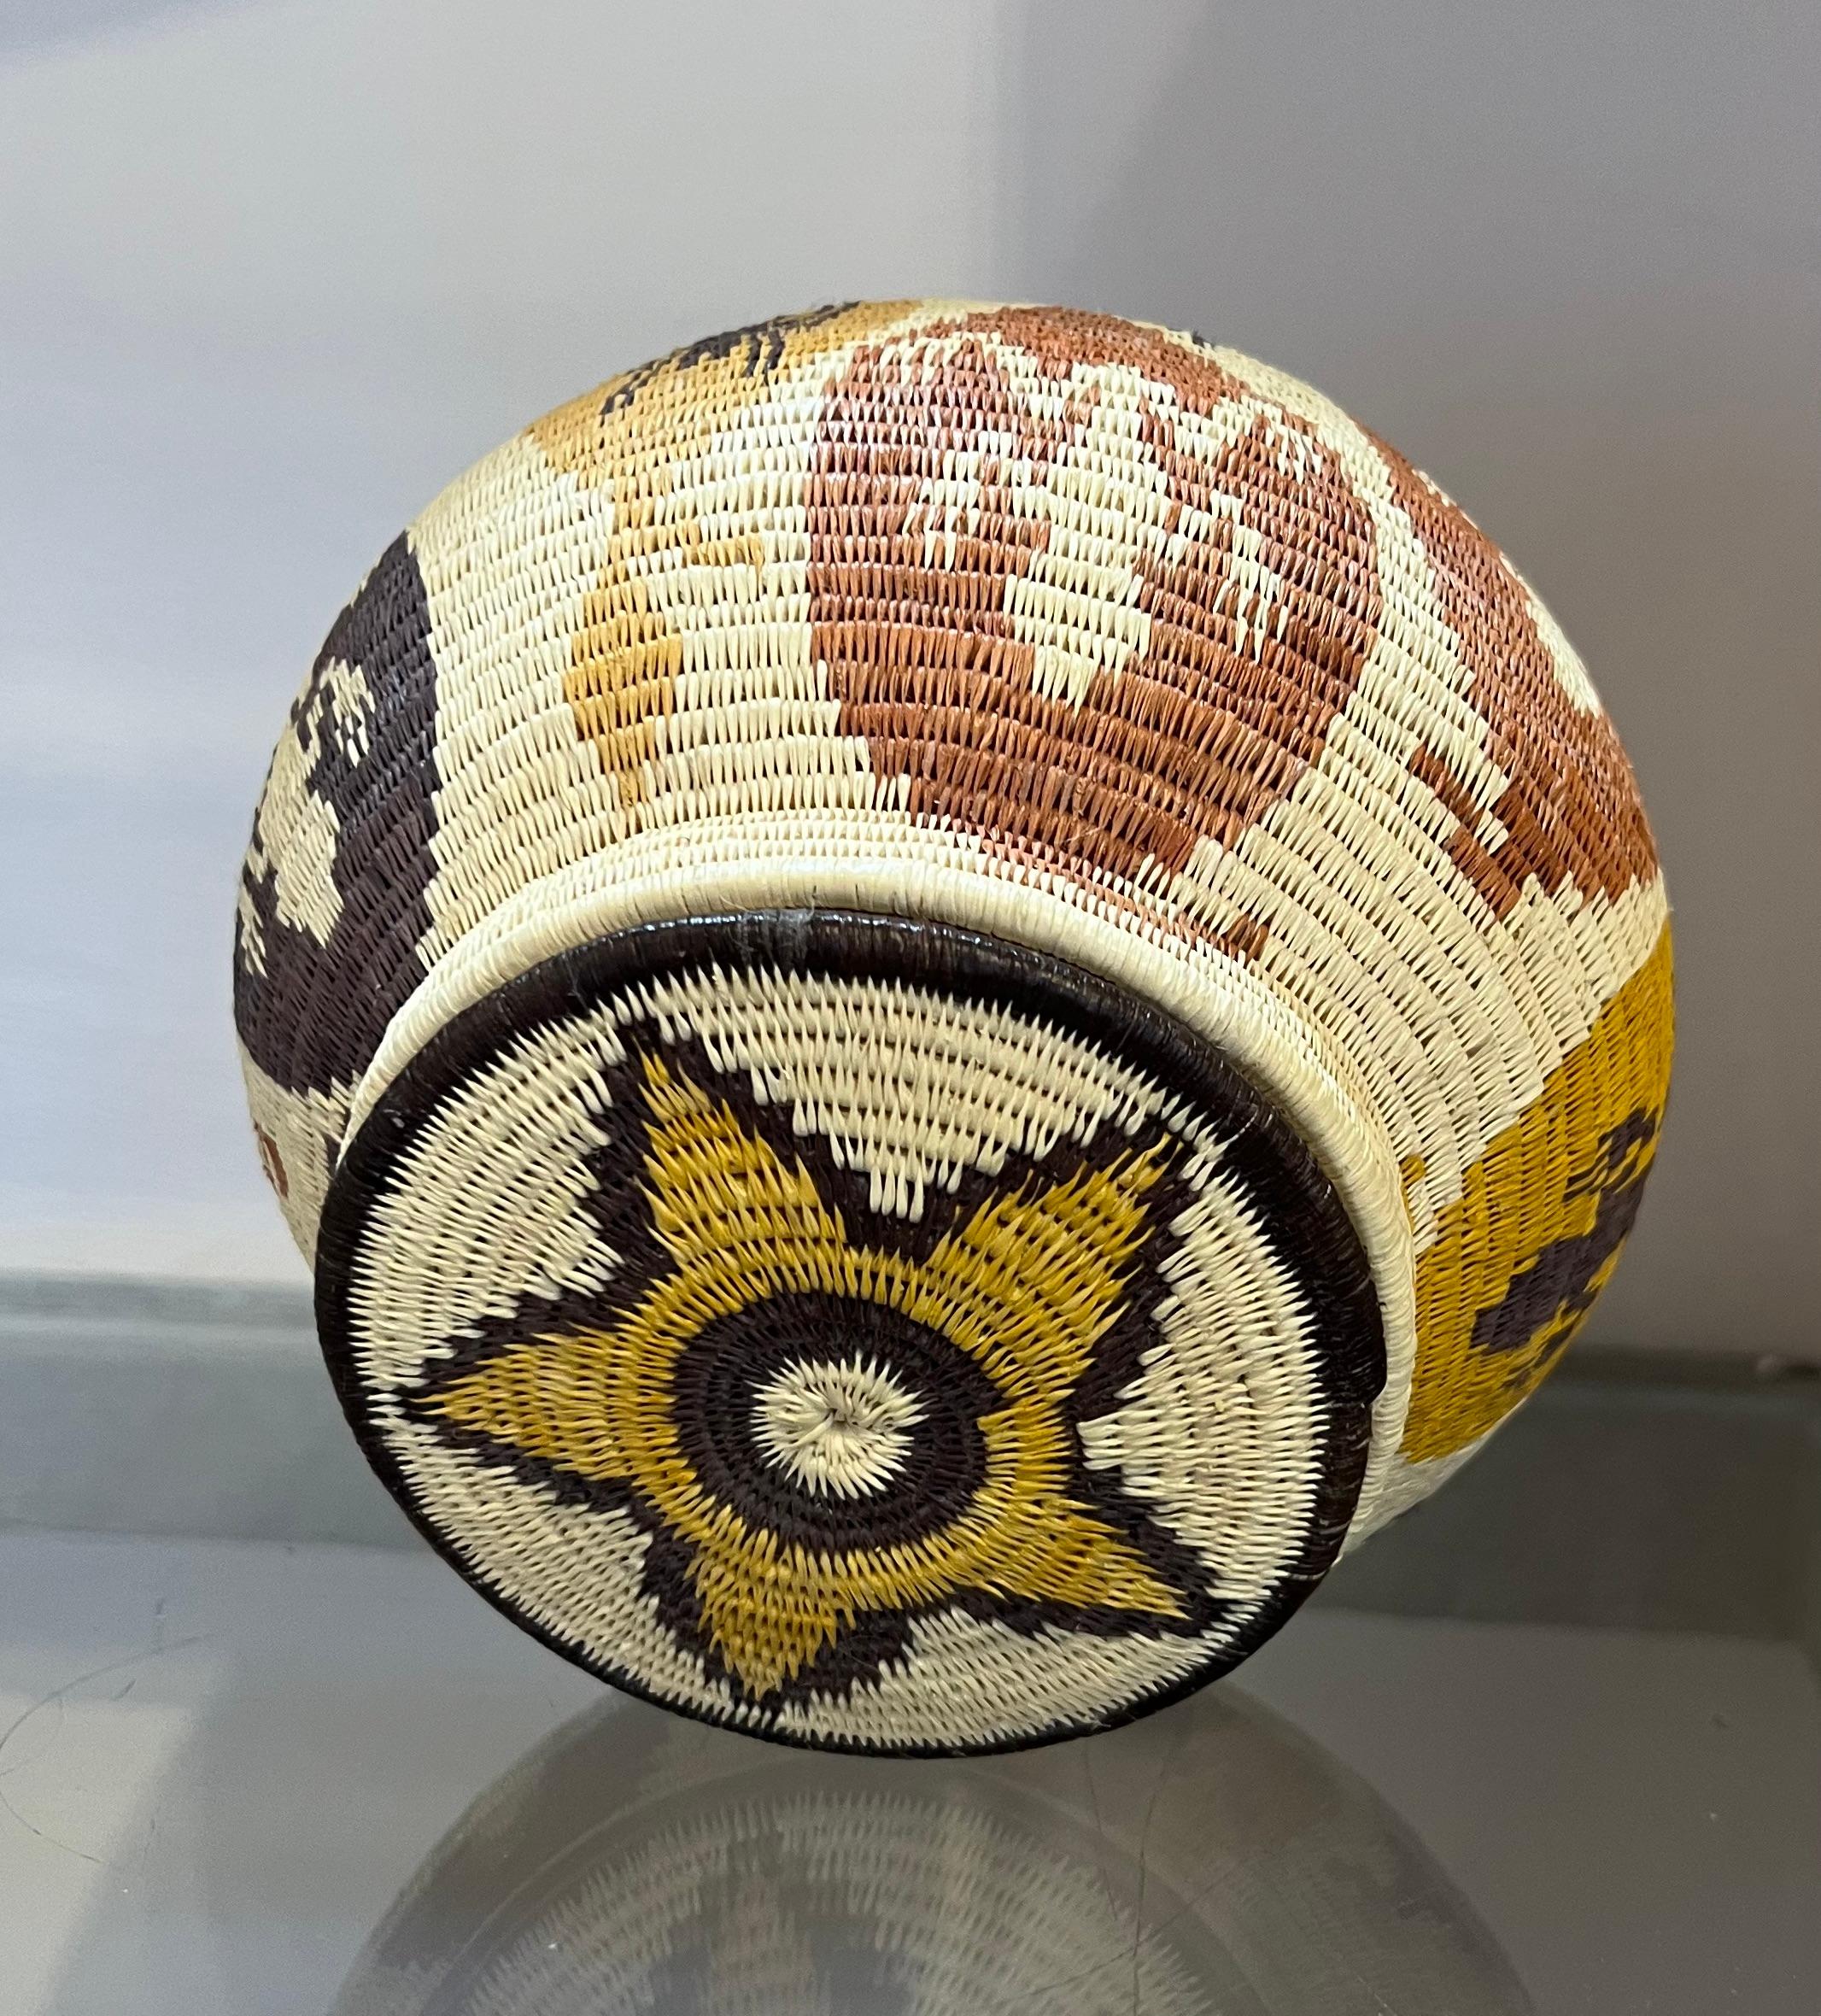 Frog and Spider Basket, Panama Rain Forest, Wounaan Tribe, handwoven, white, red For Sale 4